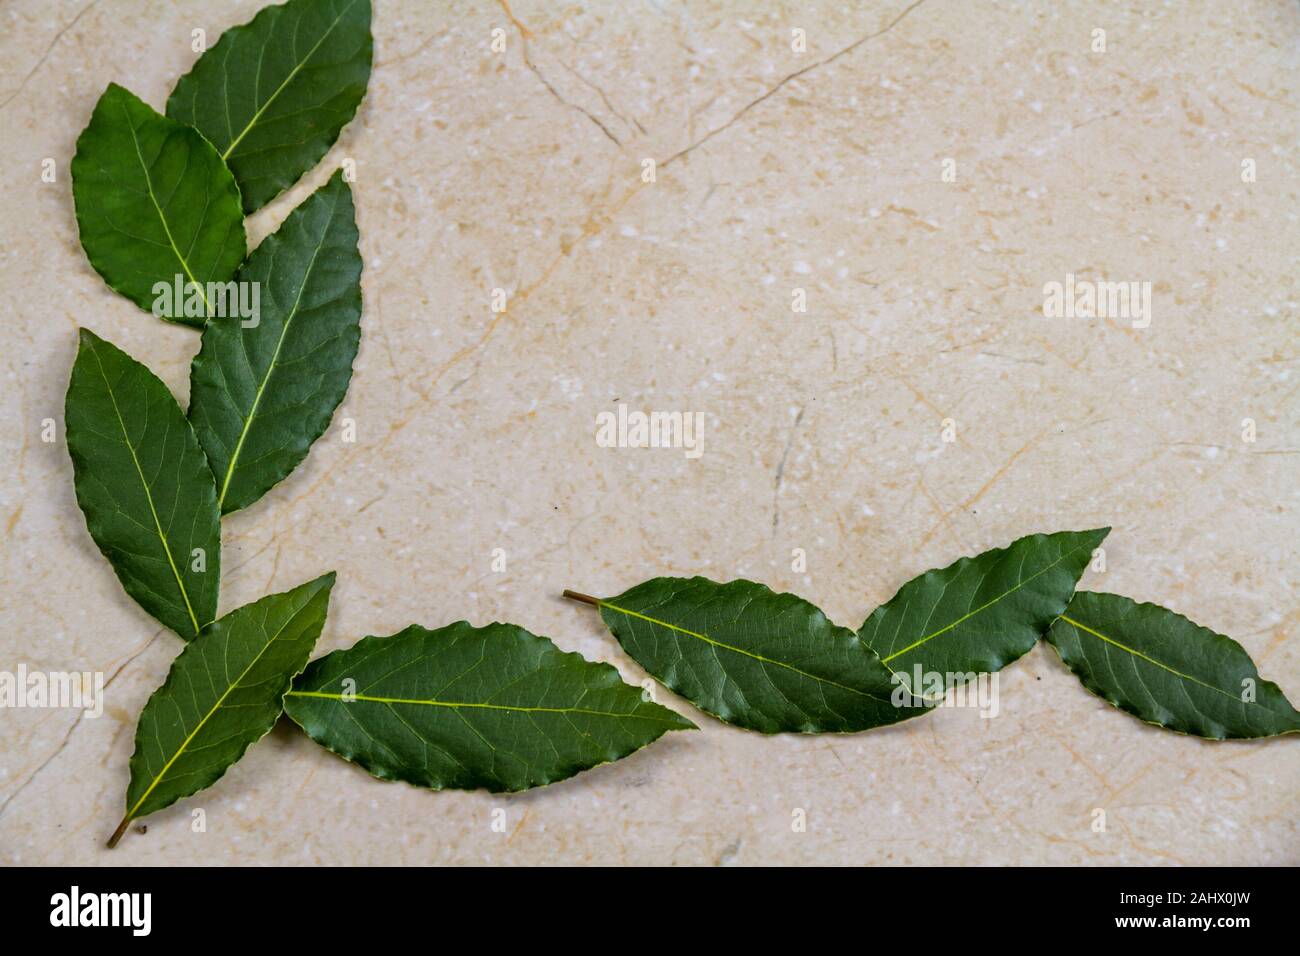 Graphic resource, green Bay leaves scattered on a marble background, in L shape Stock Photo